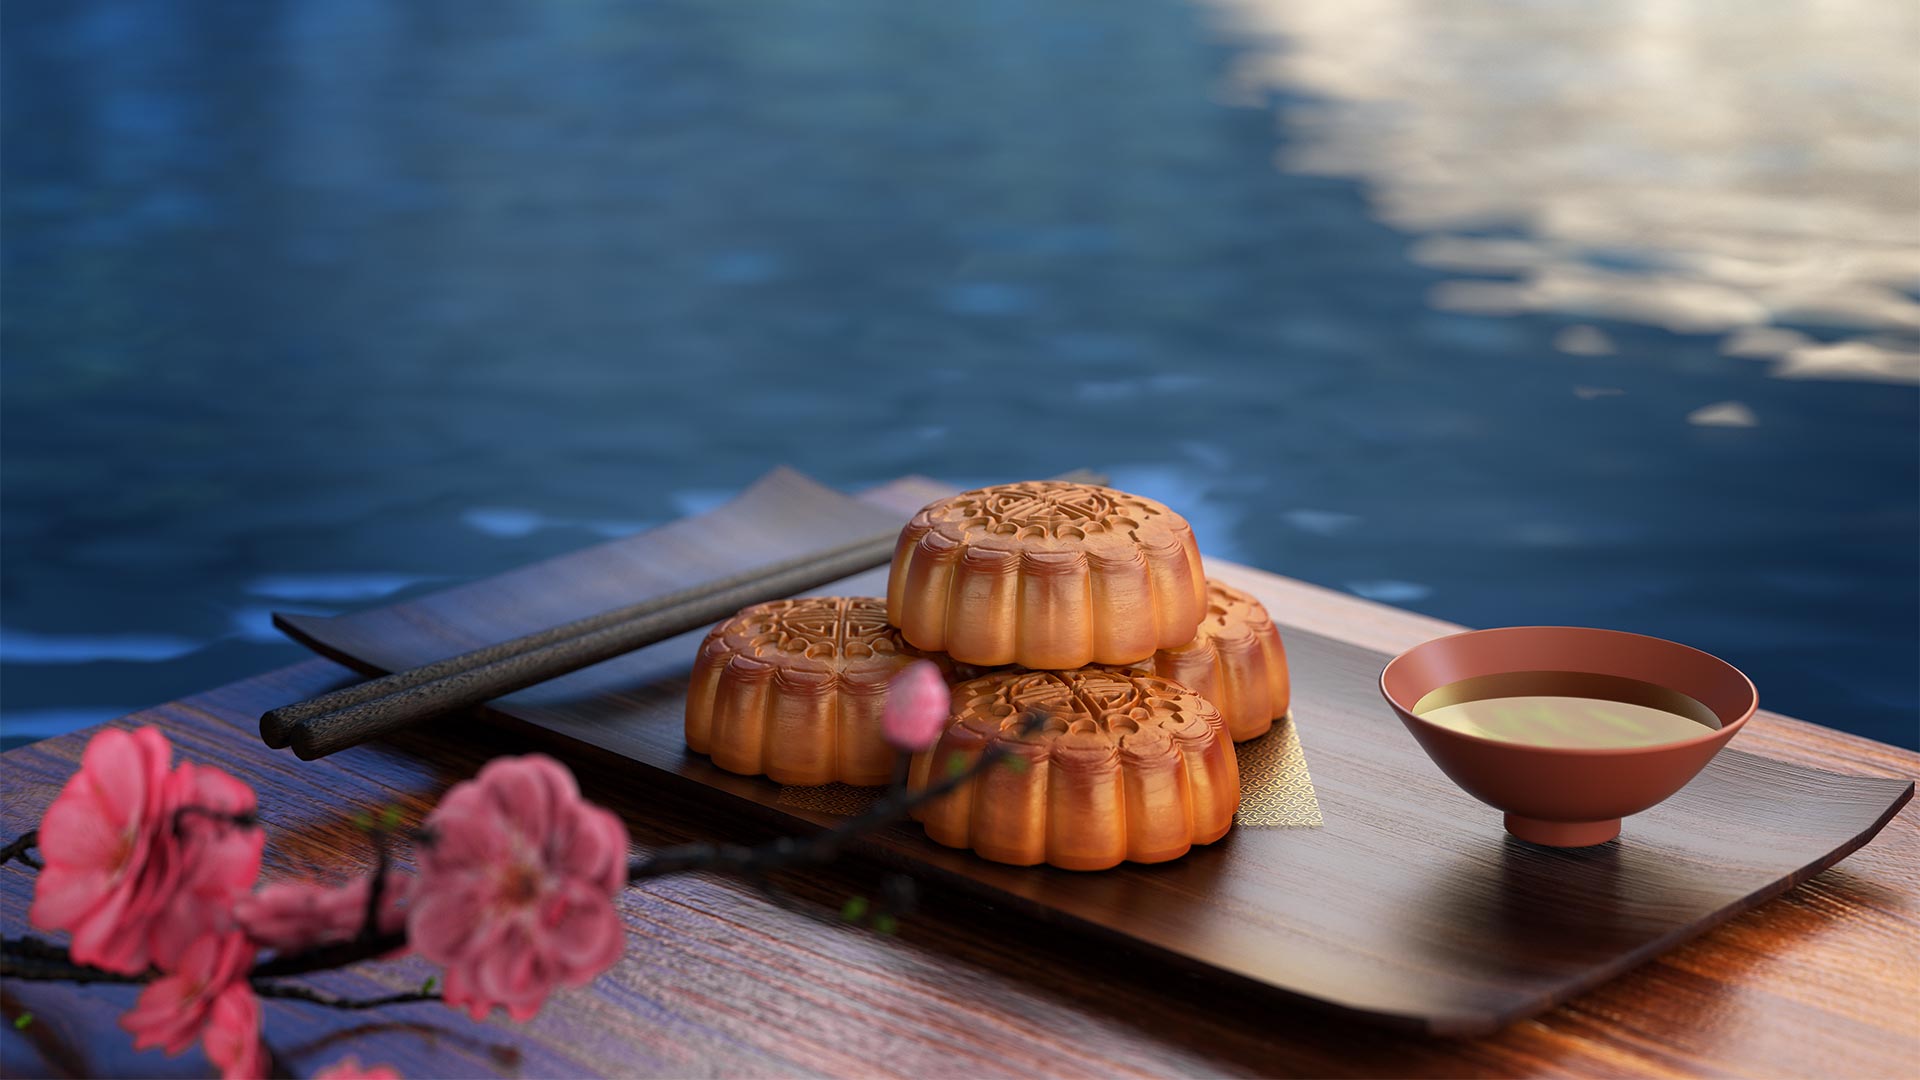 Chinese moon cakes with water in the background